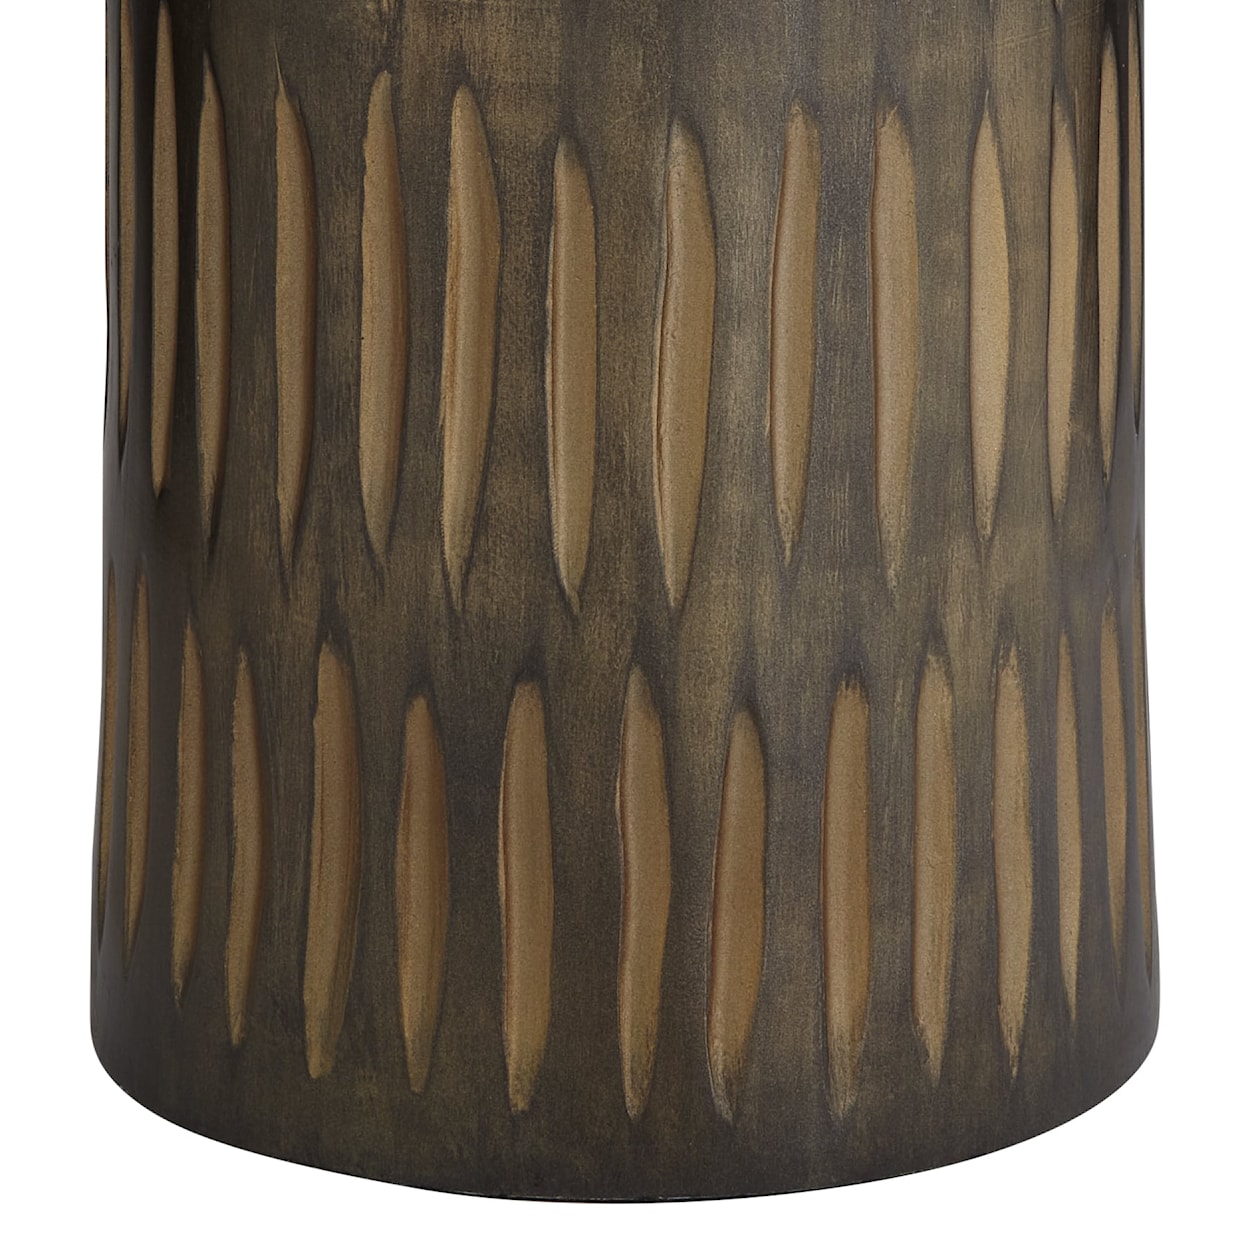 Pacific Coast Lighting Pacific Coast Lighting Fl-Poly With Hand Carved Pattern